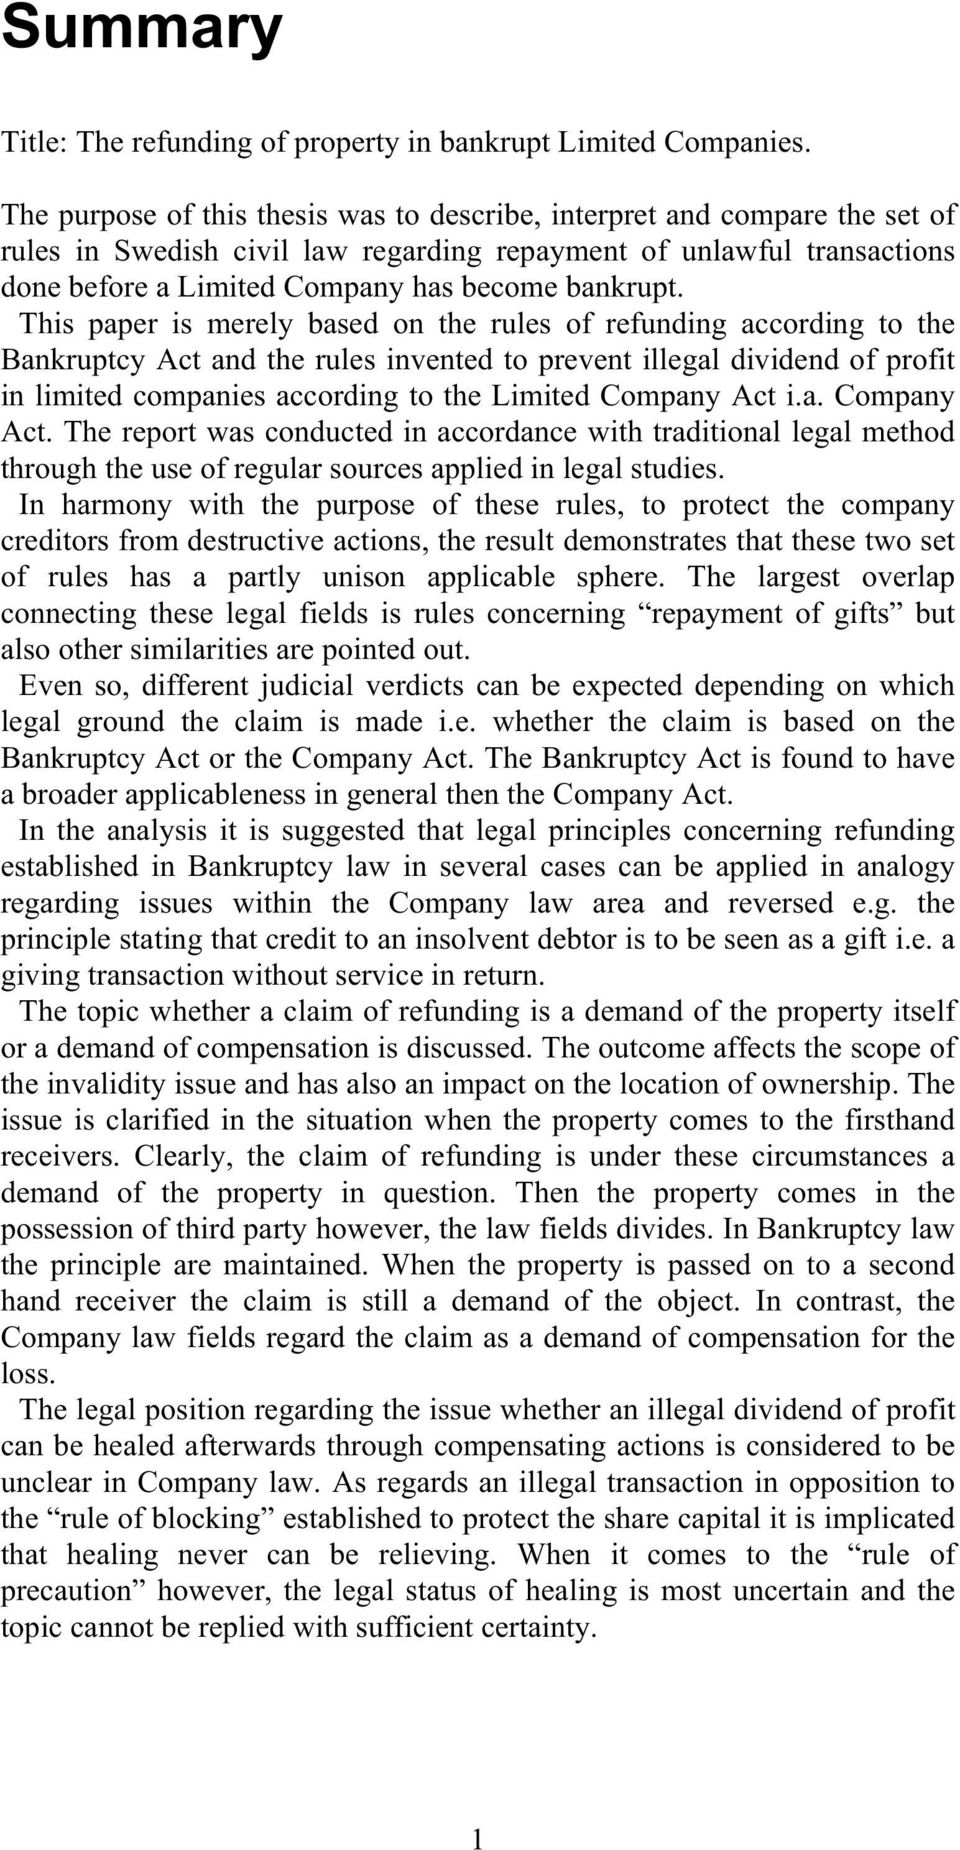 This paper is merely based on the rules of refunding according to the Bankruptcy Act and the rules invented to prevent illegal dividend of profit in limited companies according to the Limited Company